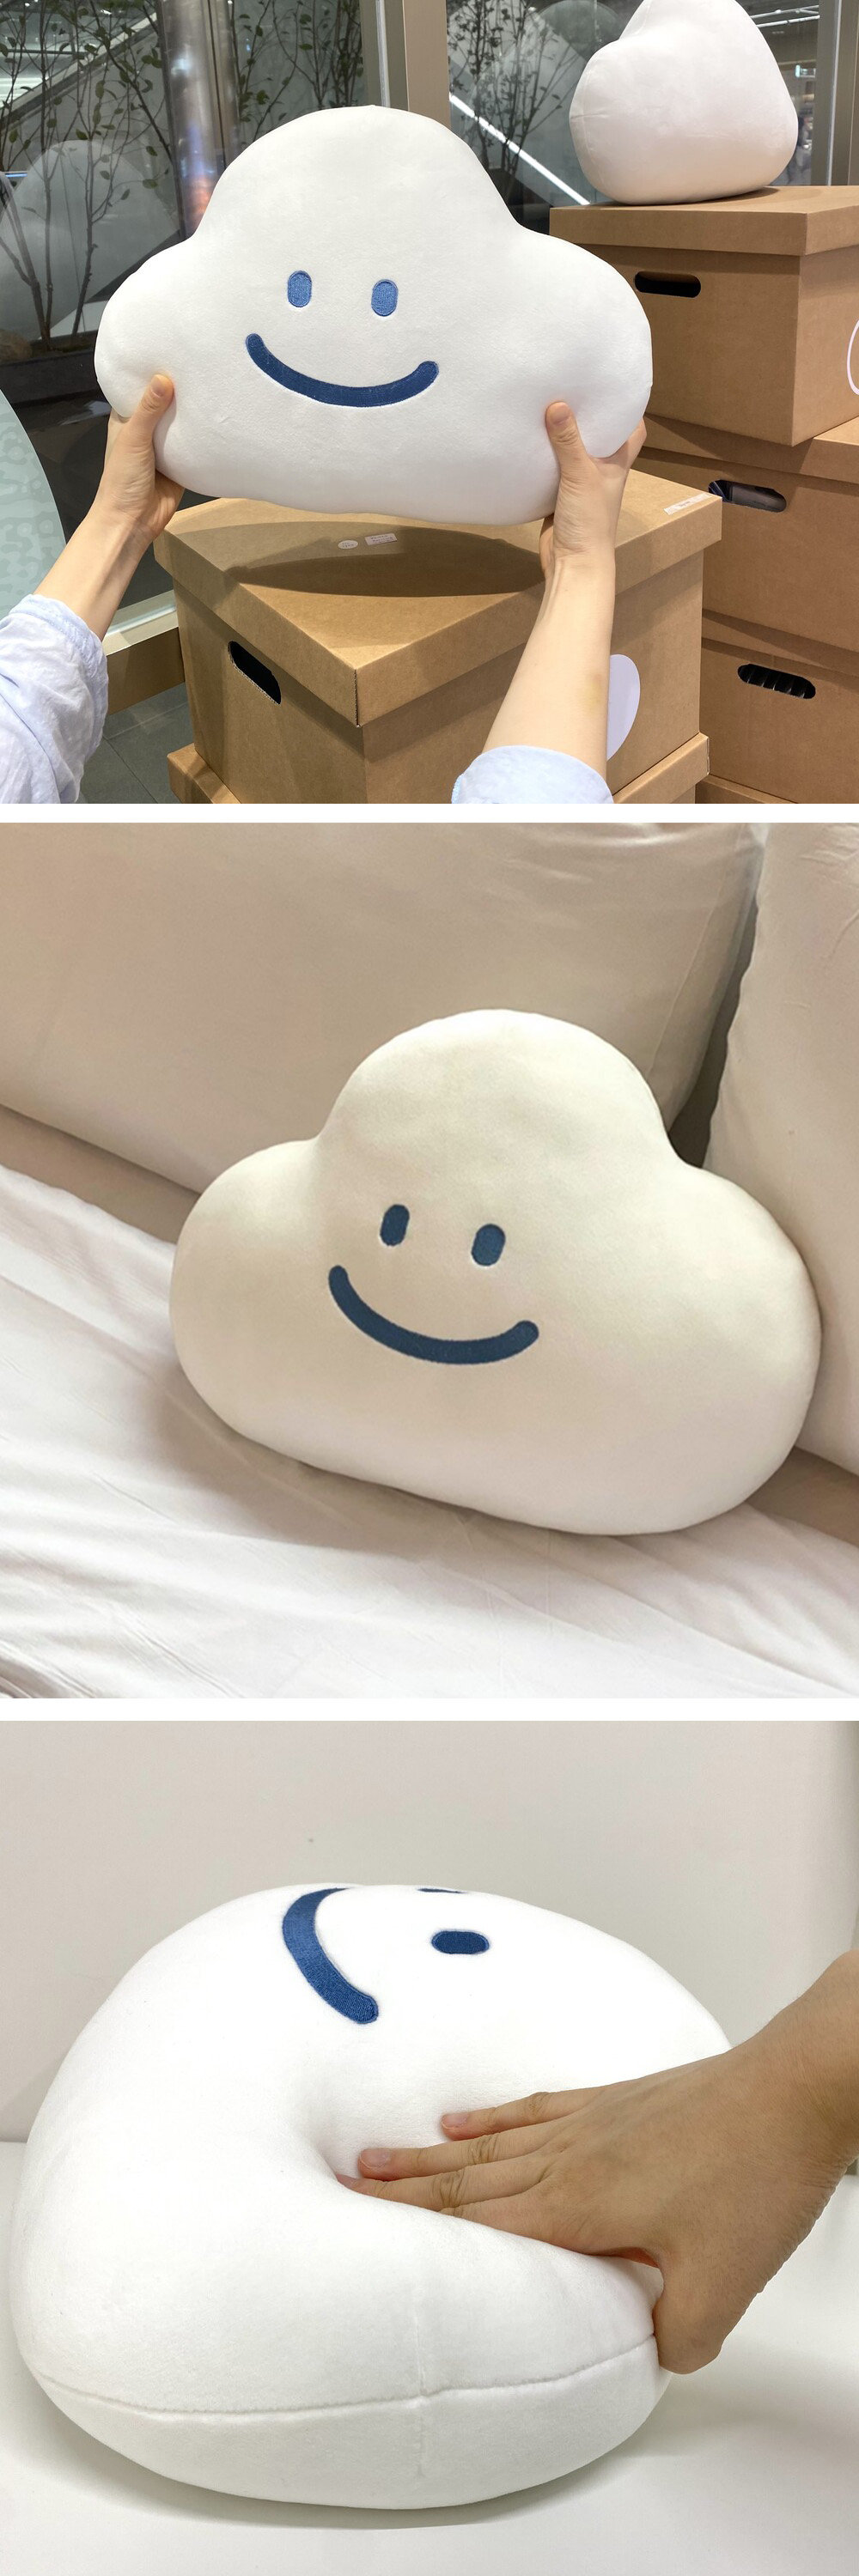 Cloud-Shaped Pillow - 5 Colors Choose - Comfortable Haven from Apollo Box